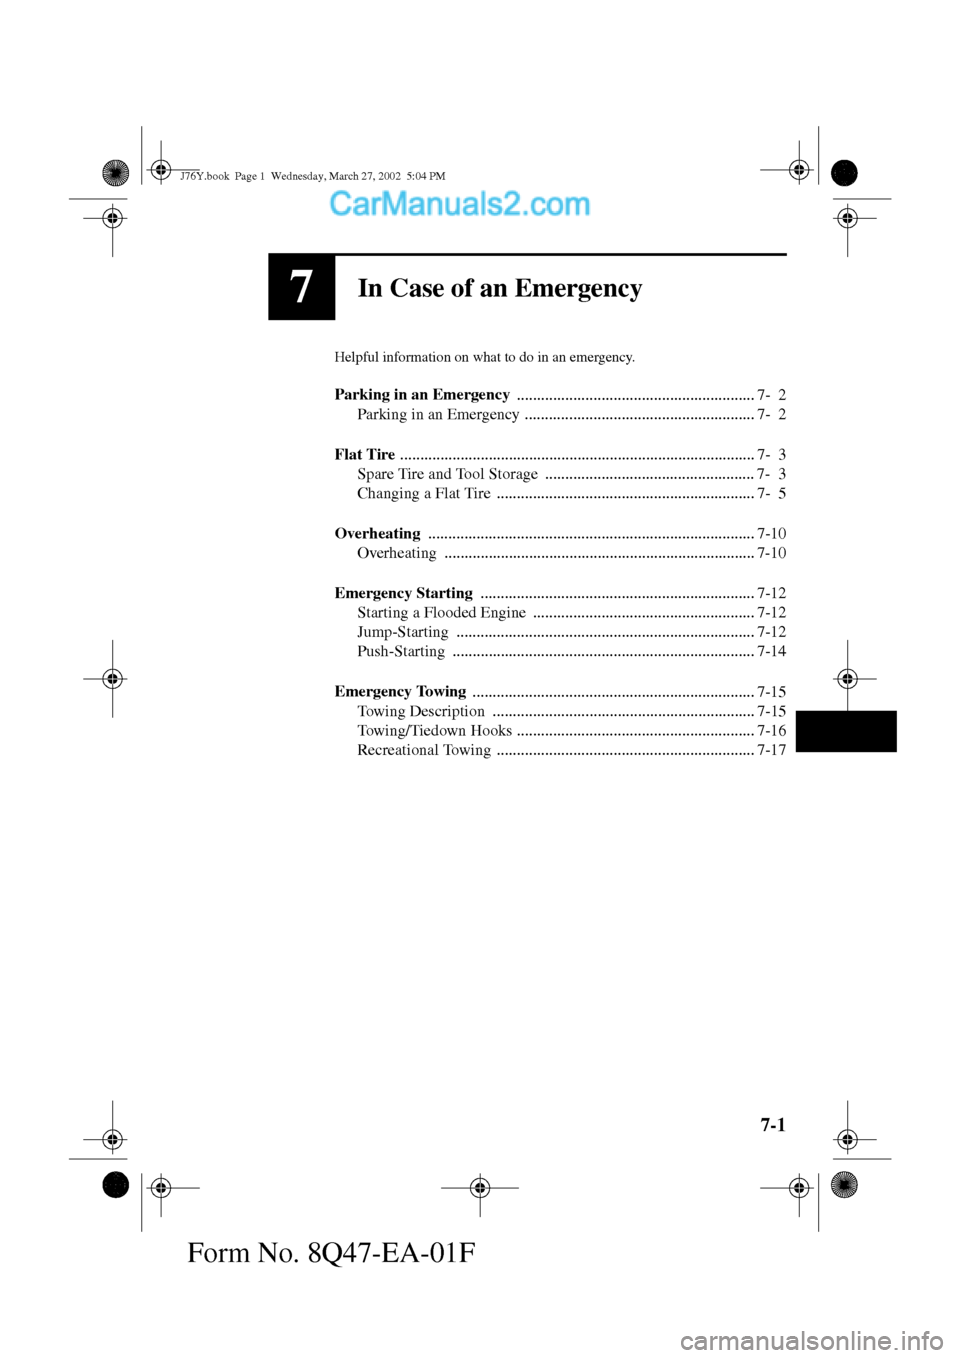 MAZDA MODEL MILLENIA 2002  Owners Manual (in English) 7-1
Form No. 8Q47-EA-01F
7In Case of an Emergency
Helpful information on what to do in an emergency.
Parking in an Emergency 
........................................................... 7- 2
Parking i